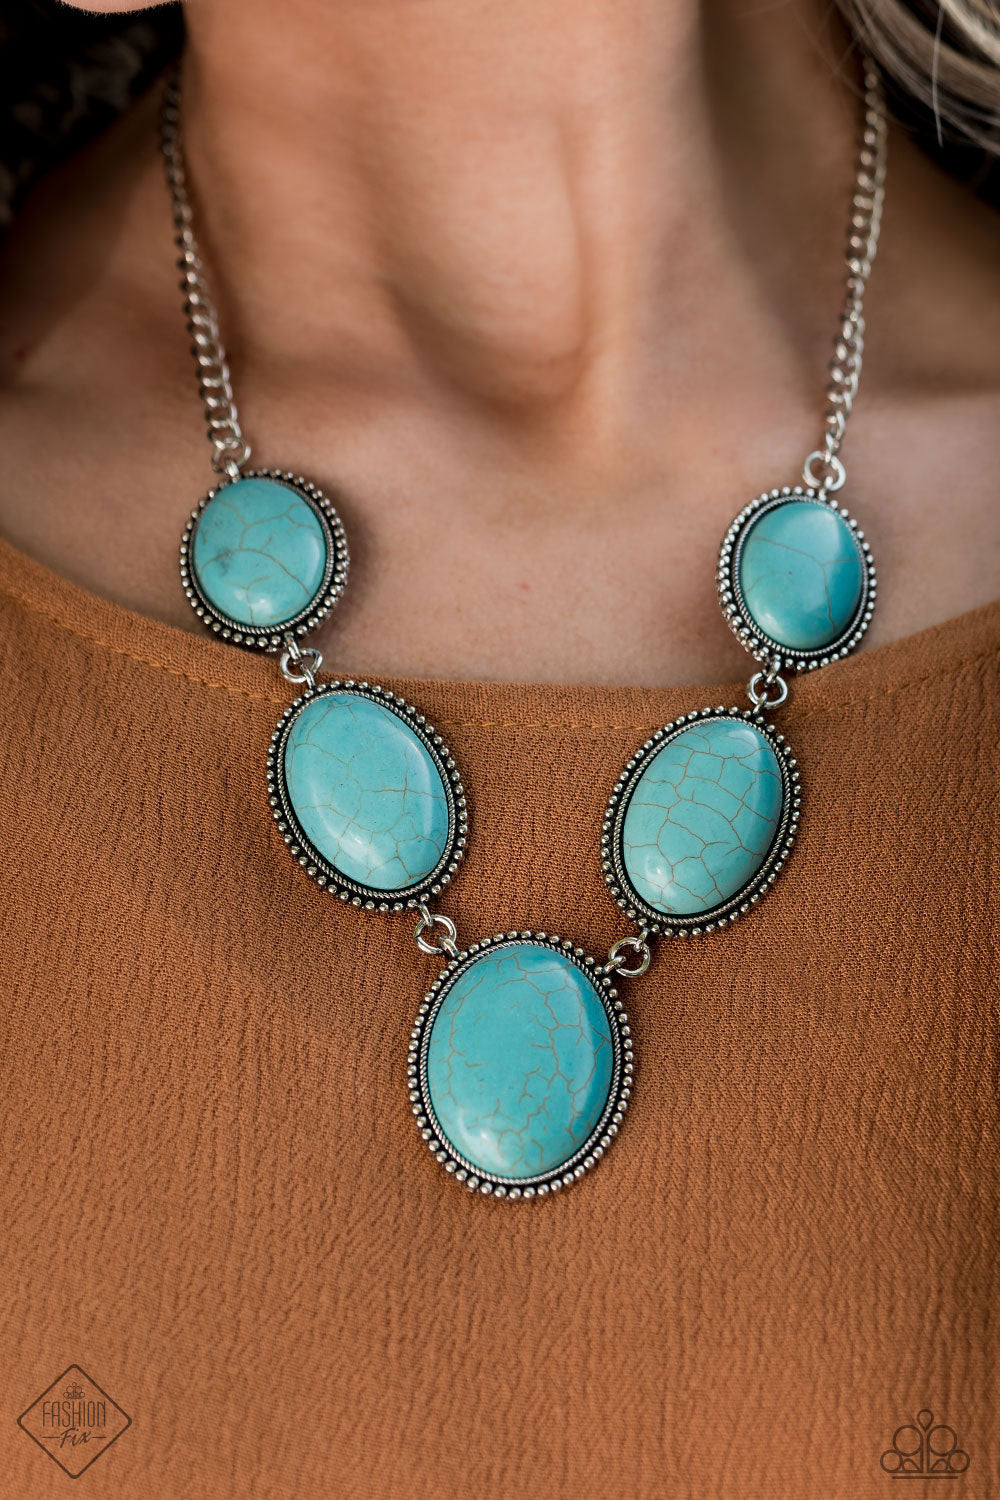 SIMPLY SANTA FE - DECEMBER 2020 BLUE TURQUOISE OVALS